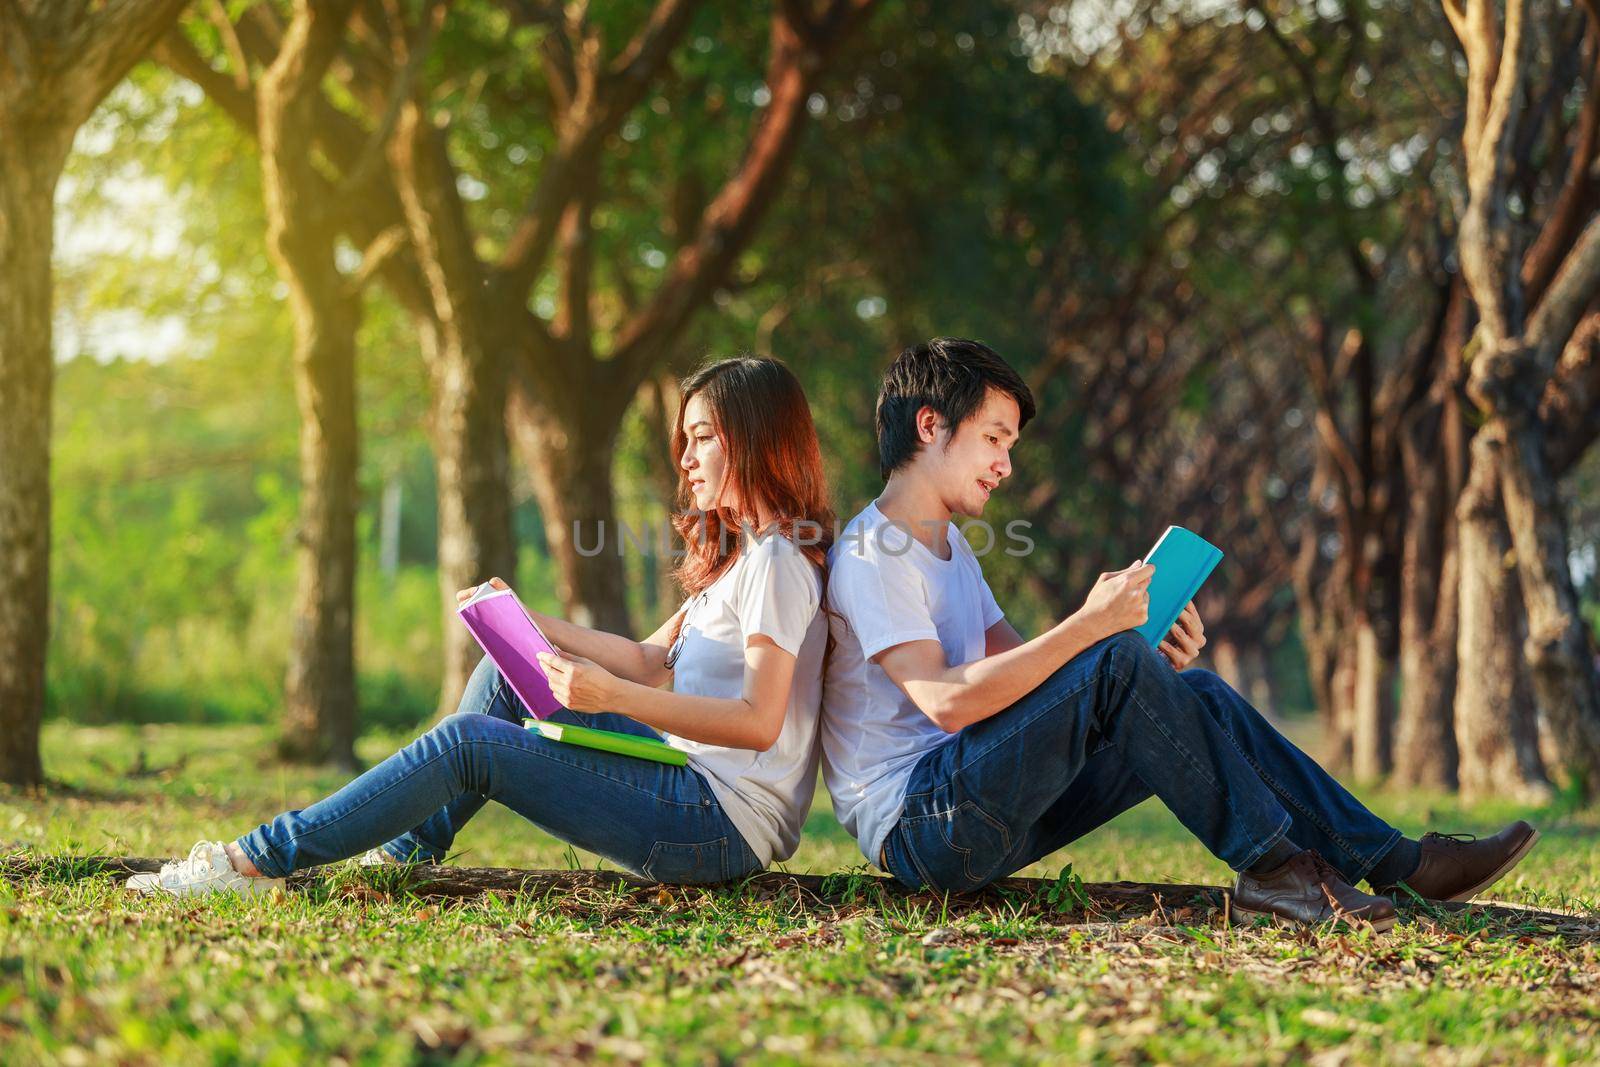 man and woman sitting and reading a book in park by geargodz